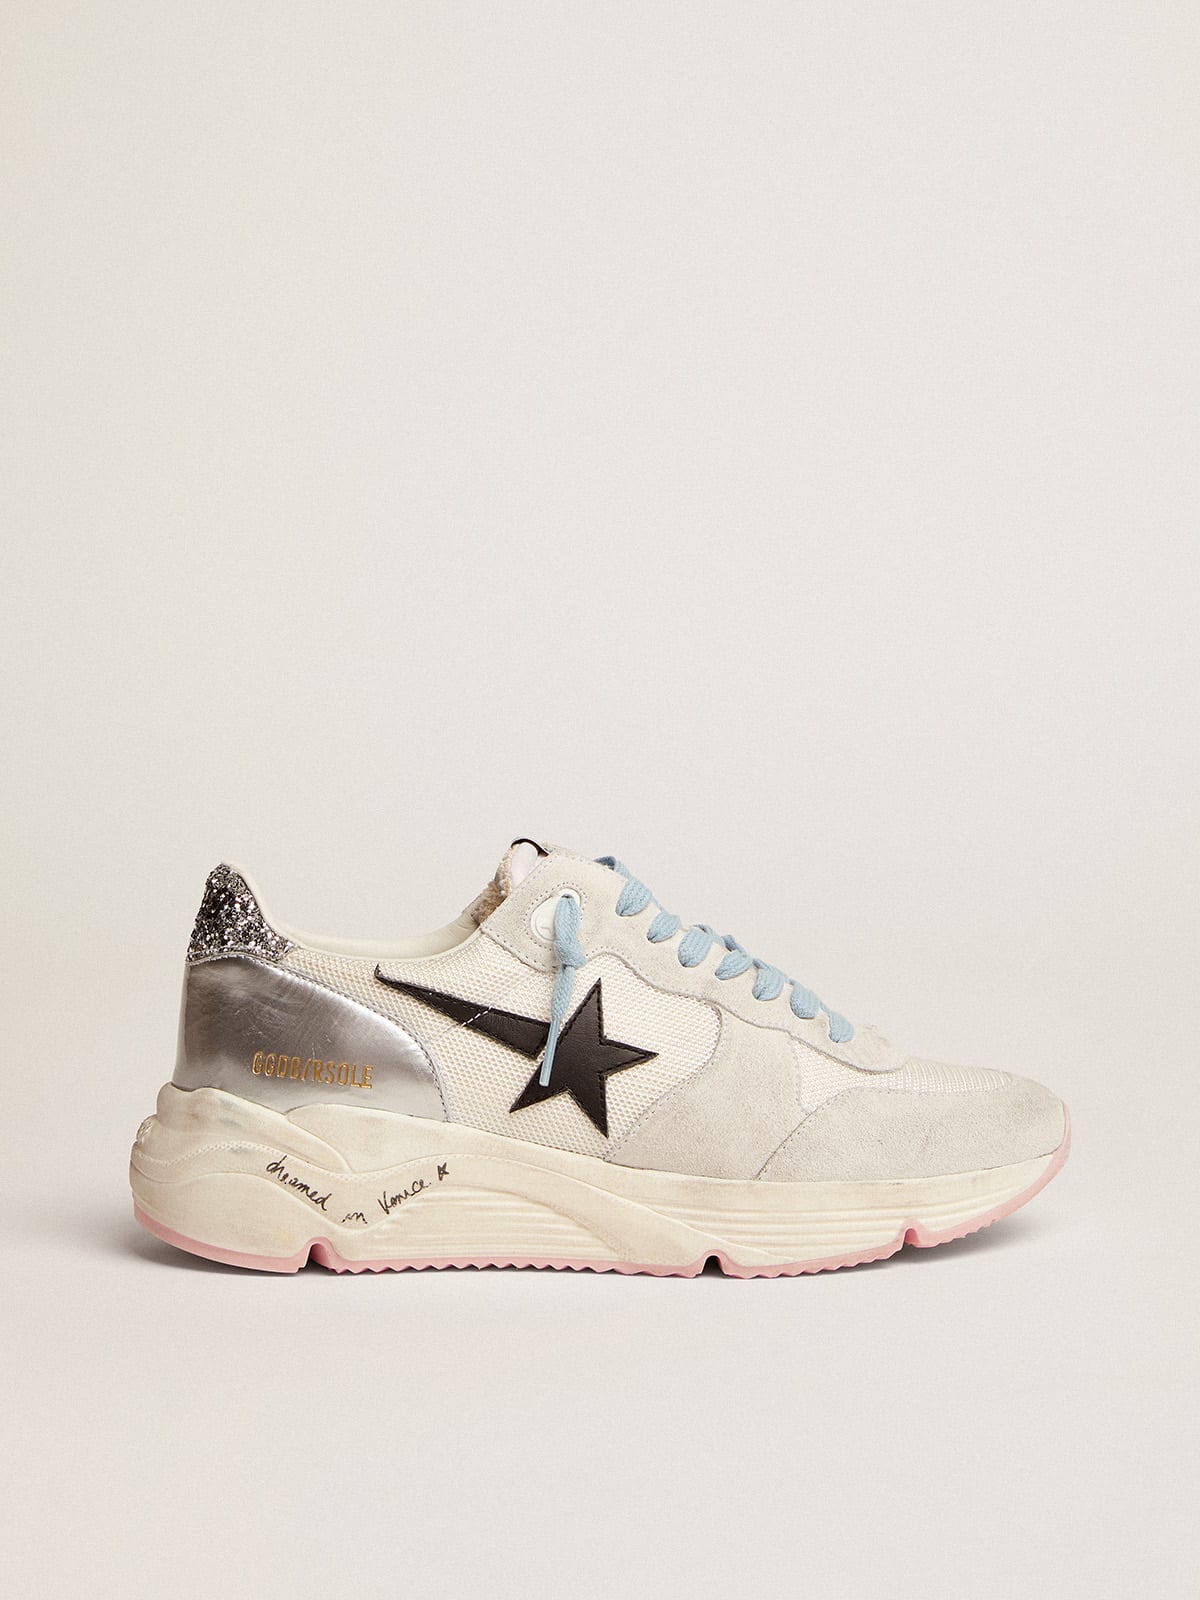 Women\'s Running Sole LTD in white mesh and suede and black star | Golden  Goose